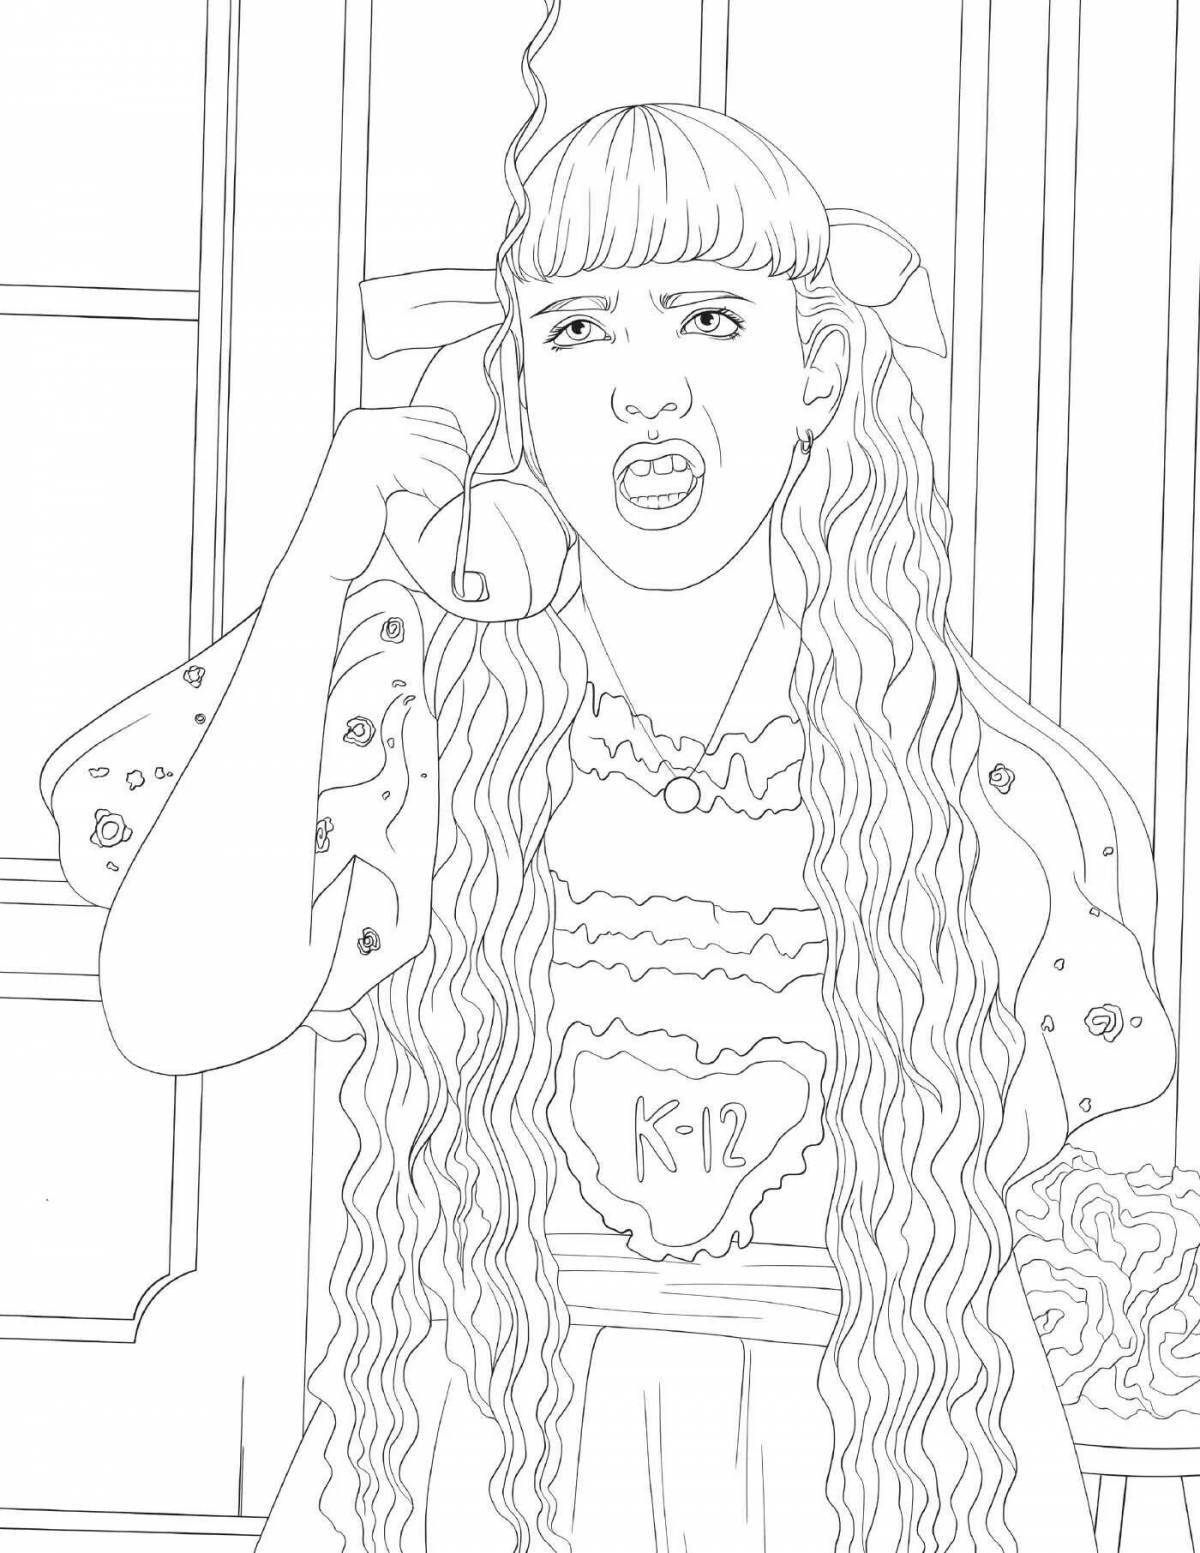 Colorful crybaby coloring page